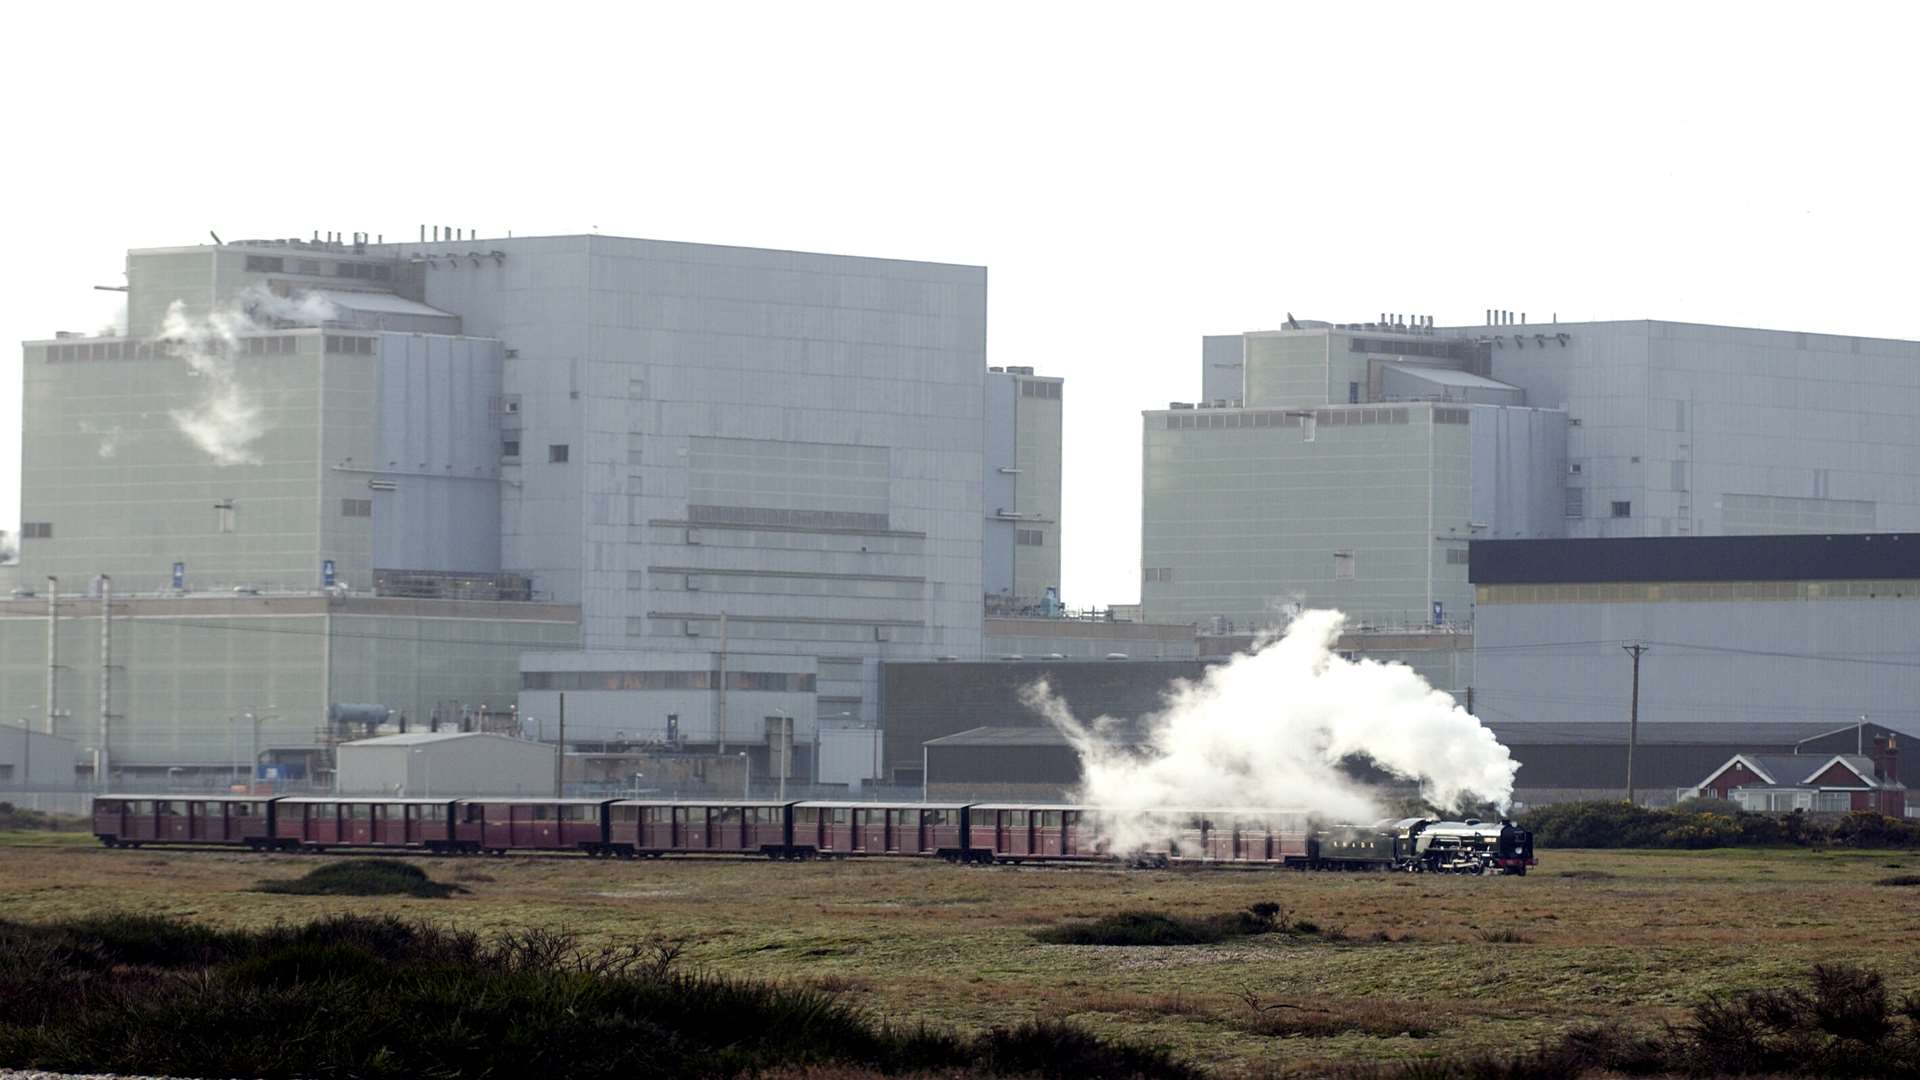 Dungeness A is being decomissioned. Councillors hope a Dungeness C will bring thousands of new jobs to the area